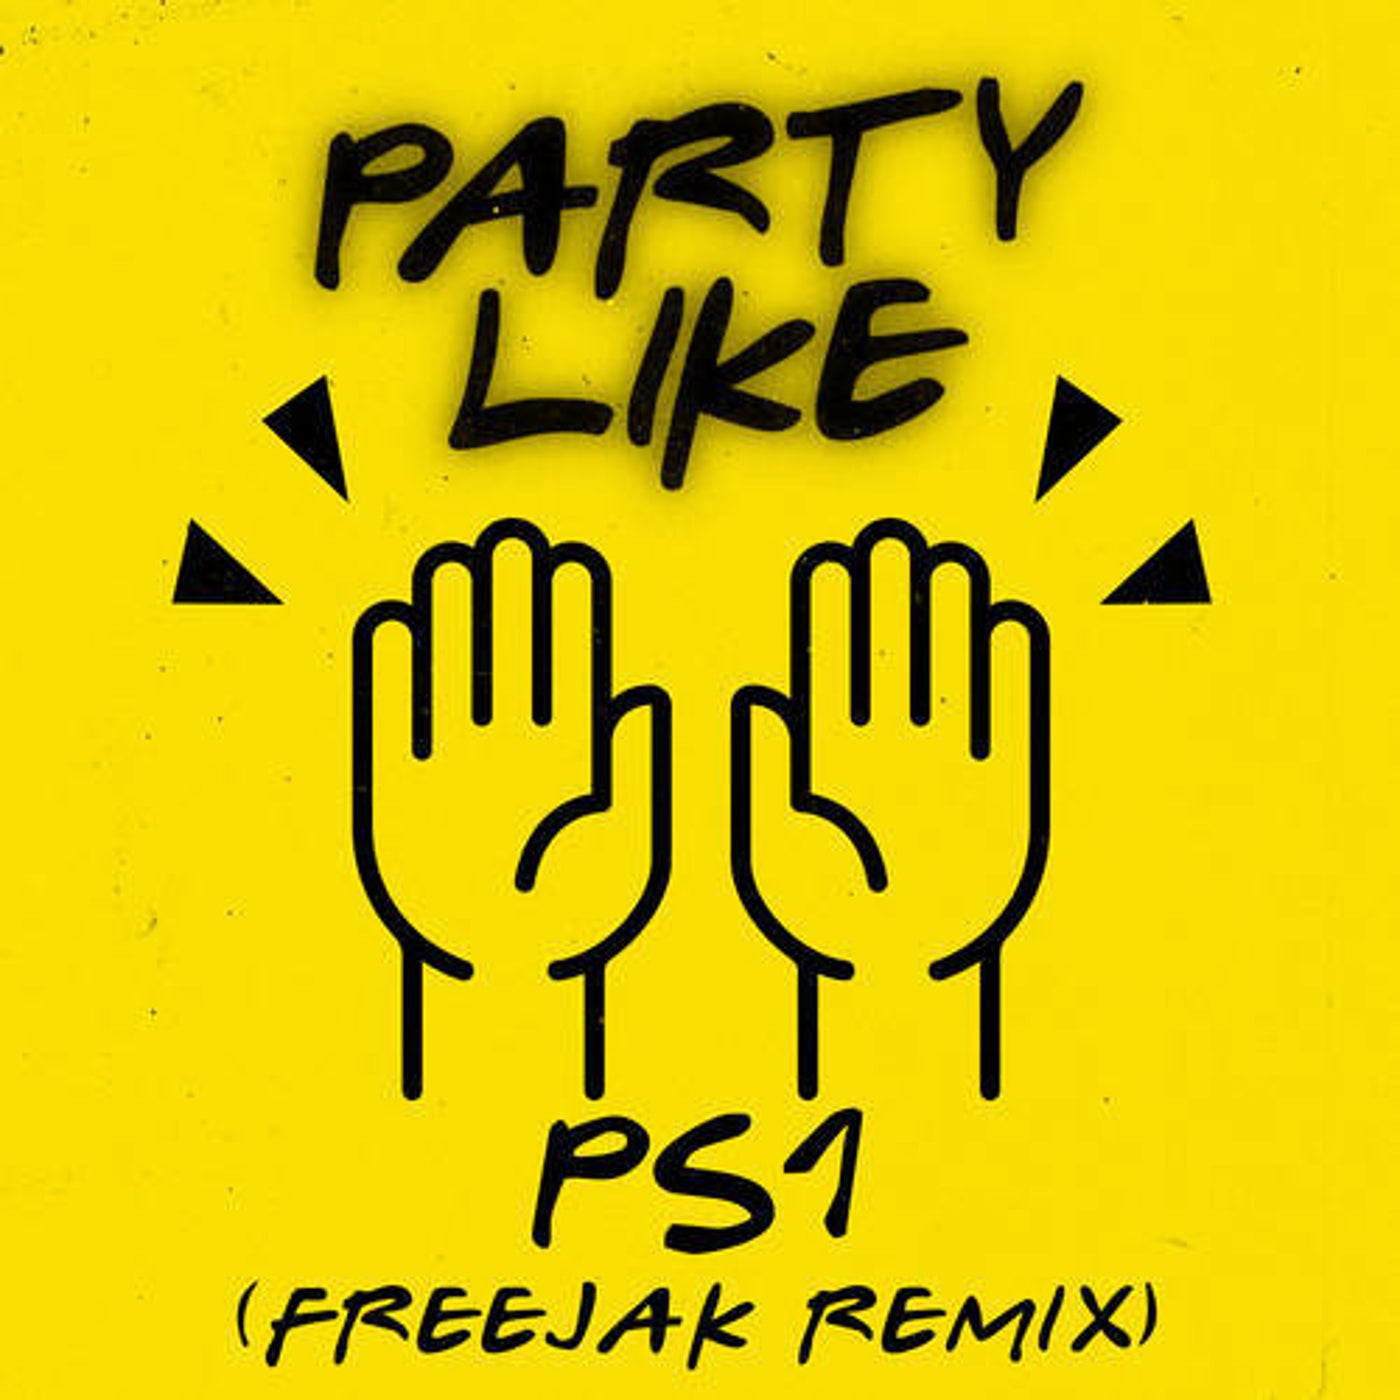 Party Like (Freejak Extended Remix)